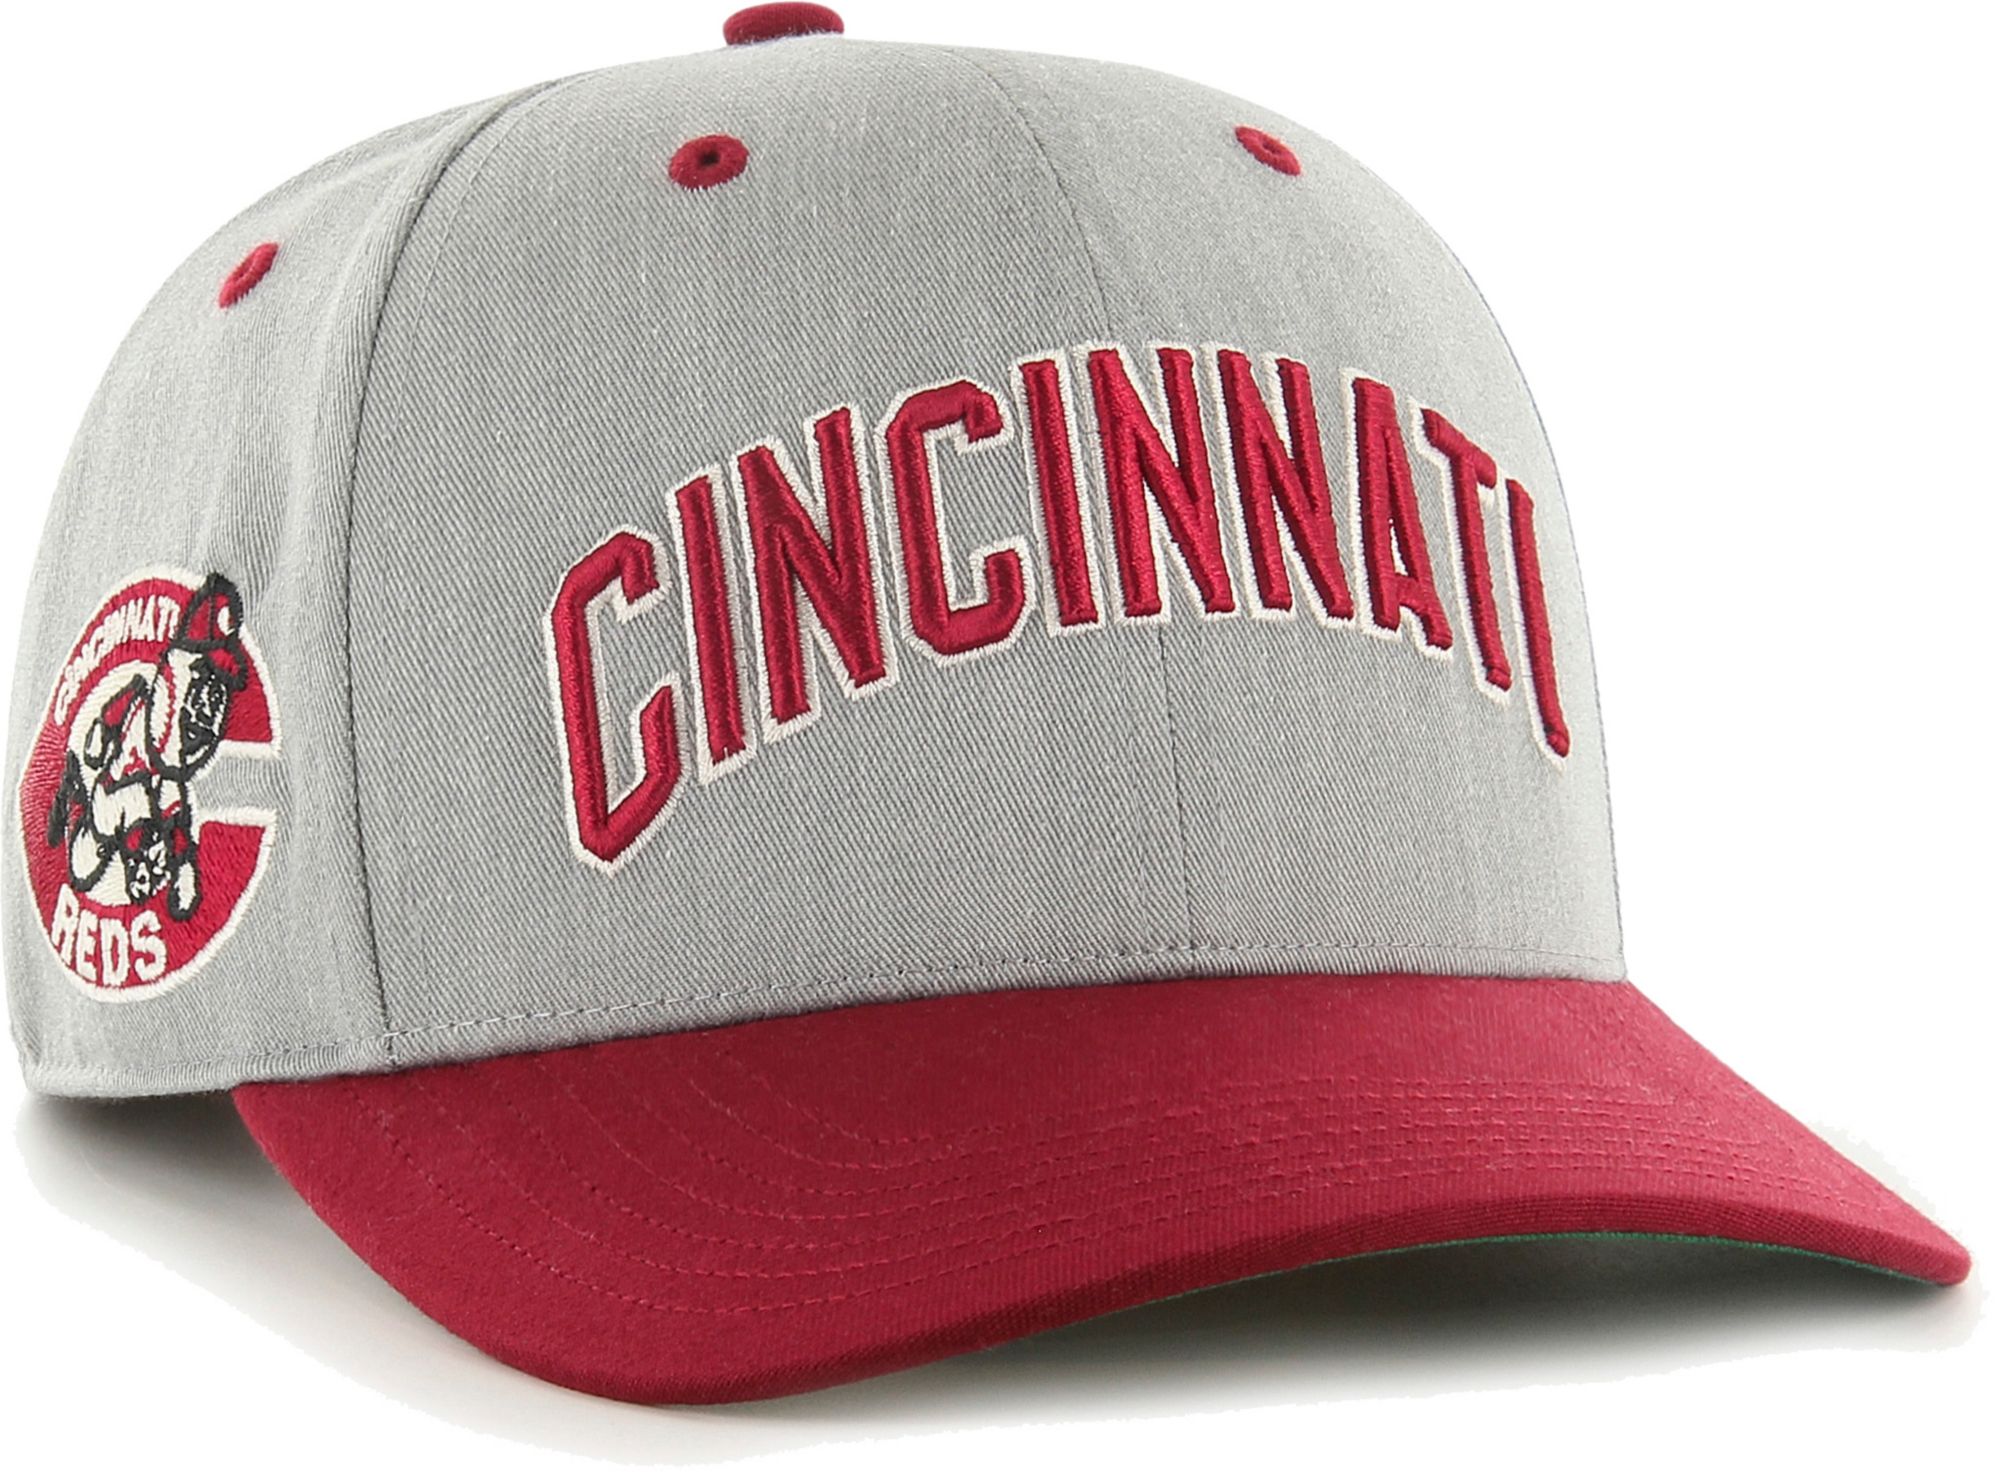 CINCINNATI REDS CITY CONNECT PRIMARY '47 CLEAN UP